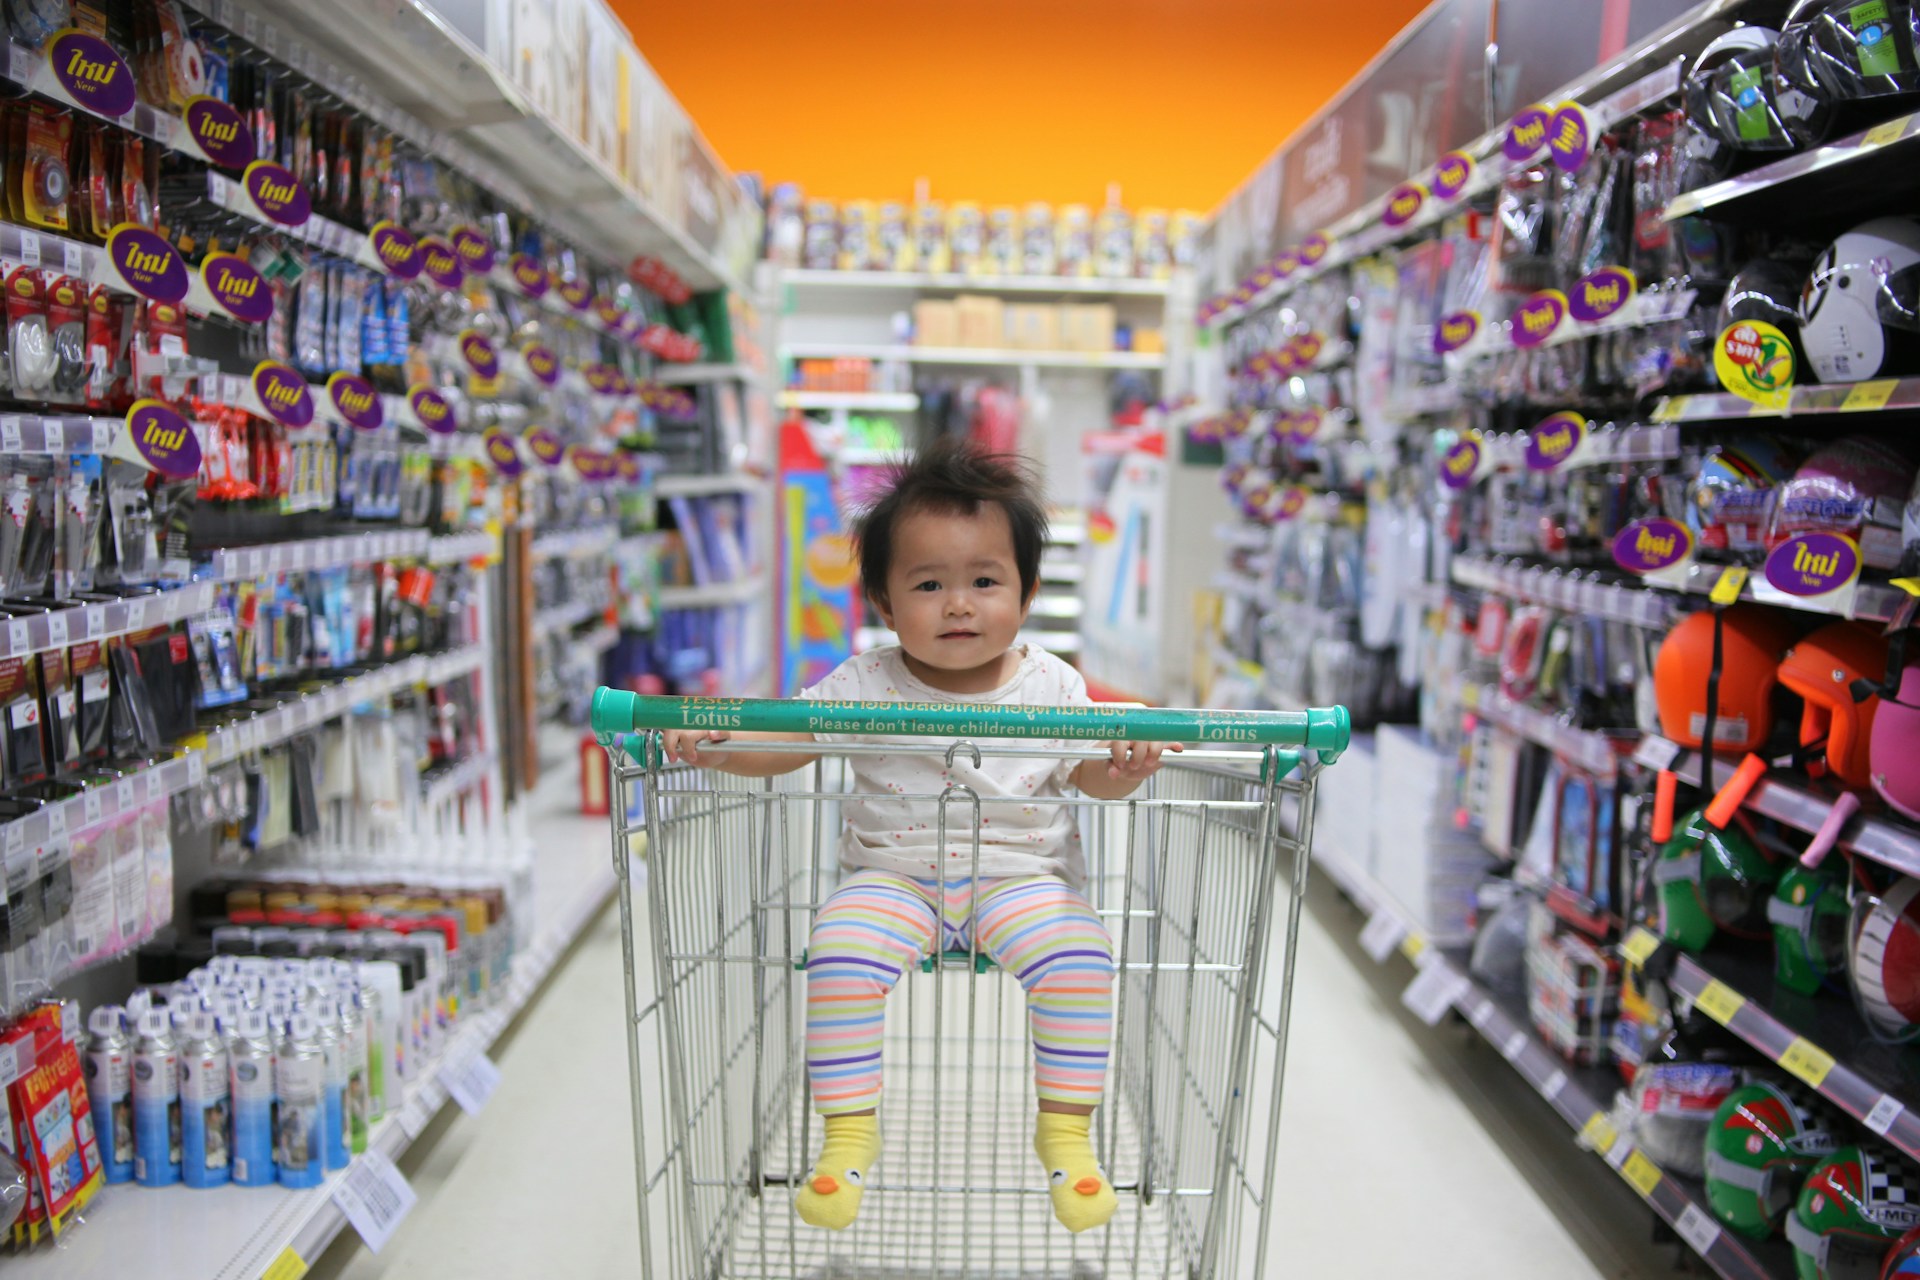 Little child in a grocery cart, in a grocery aisle, smiling at the camera